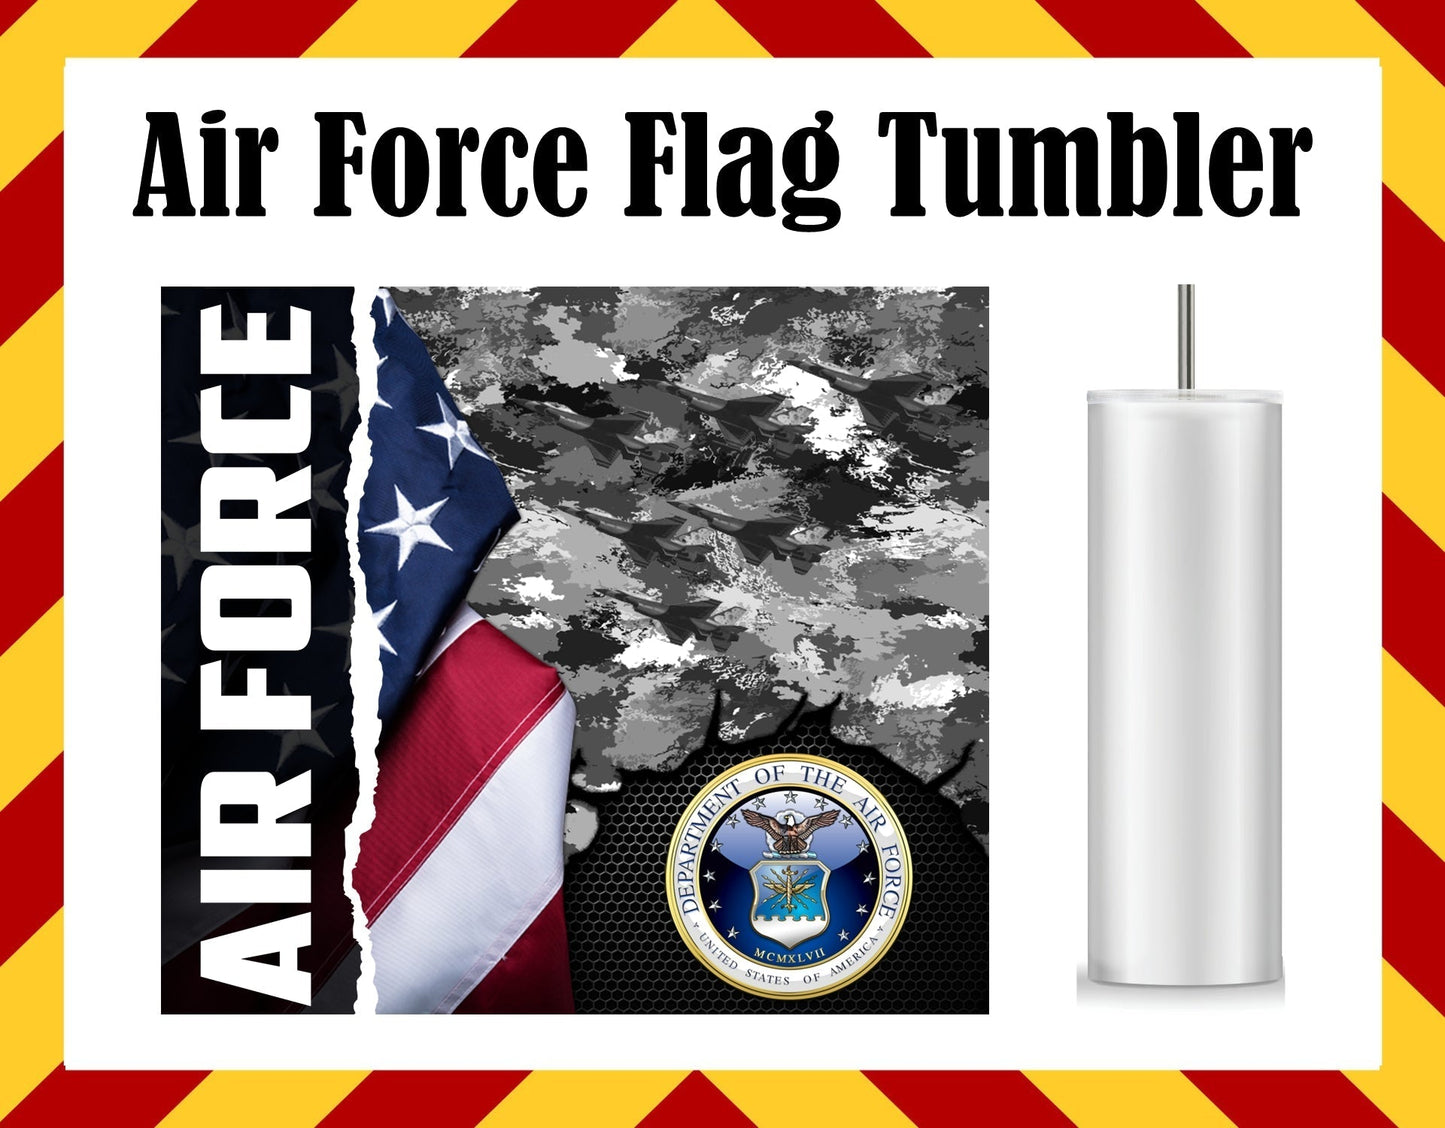 Stainless Steel Cup - Air Force Flags V2 Design Hot/Cold Cup